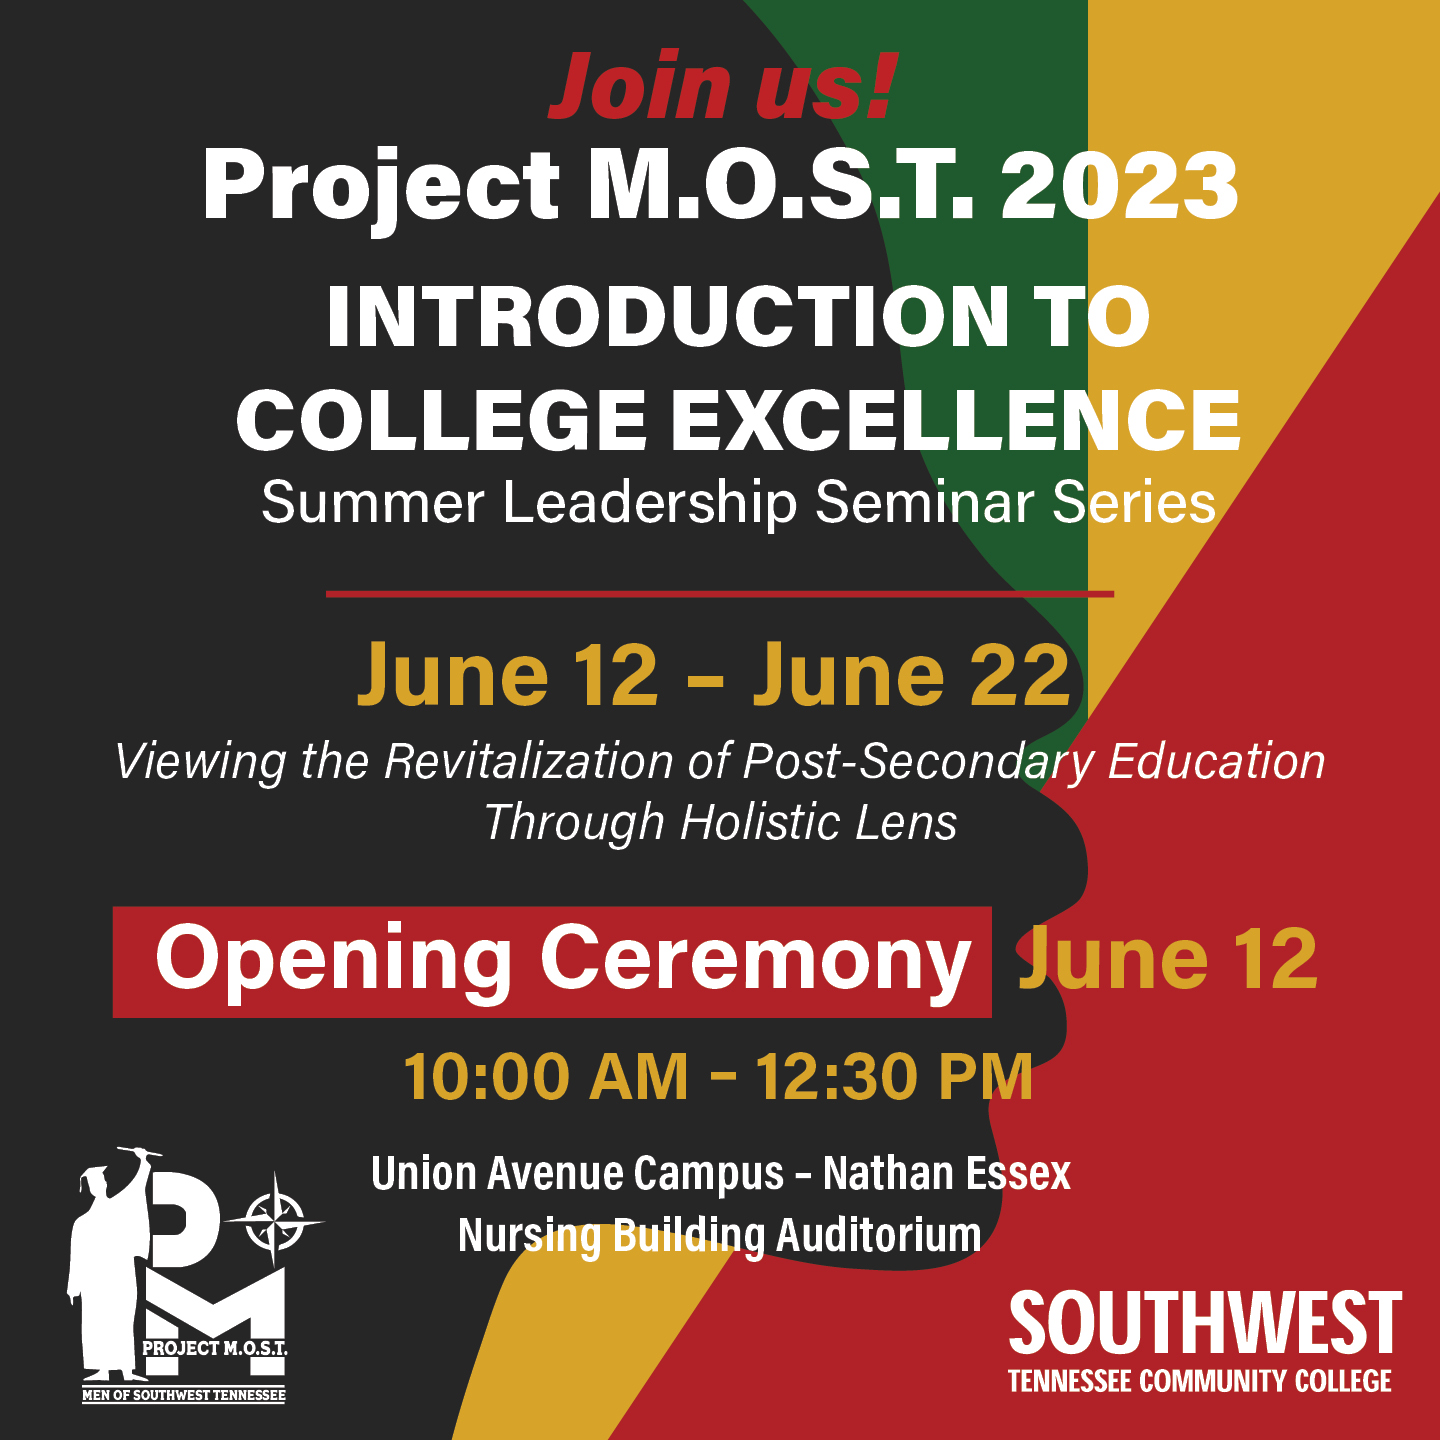 Project M.O.S.T. summer leadership series set for June 12 - 22